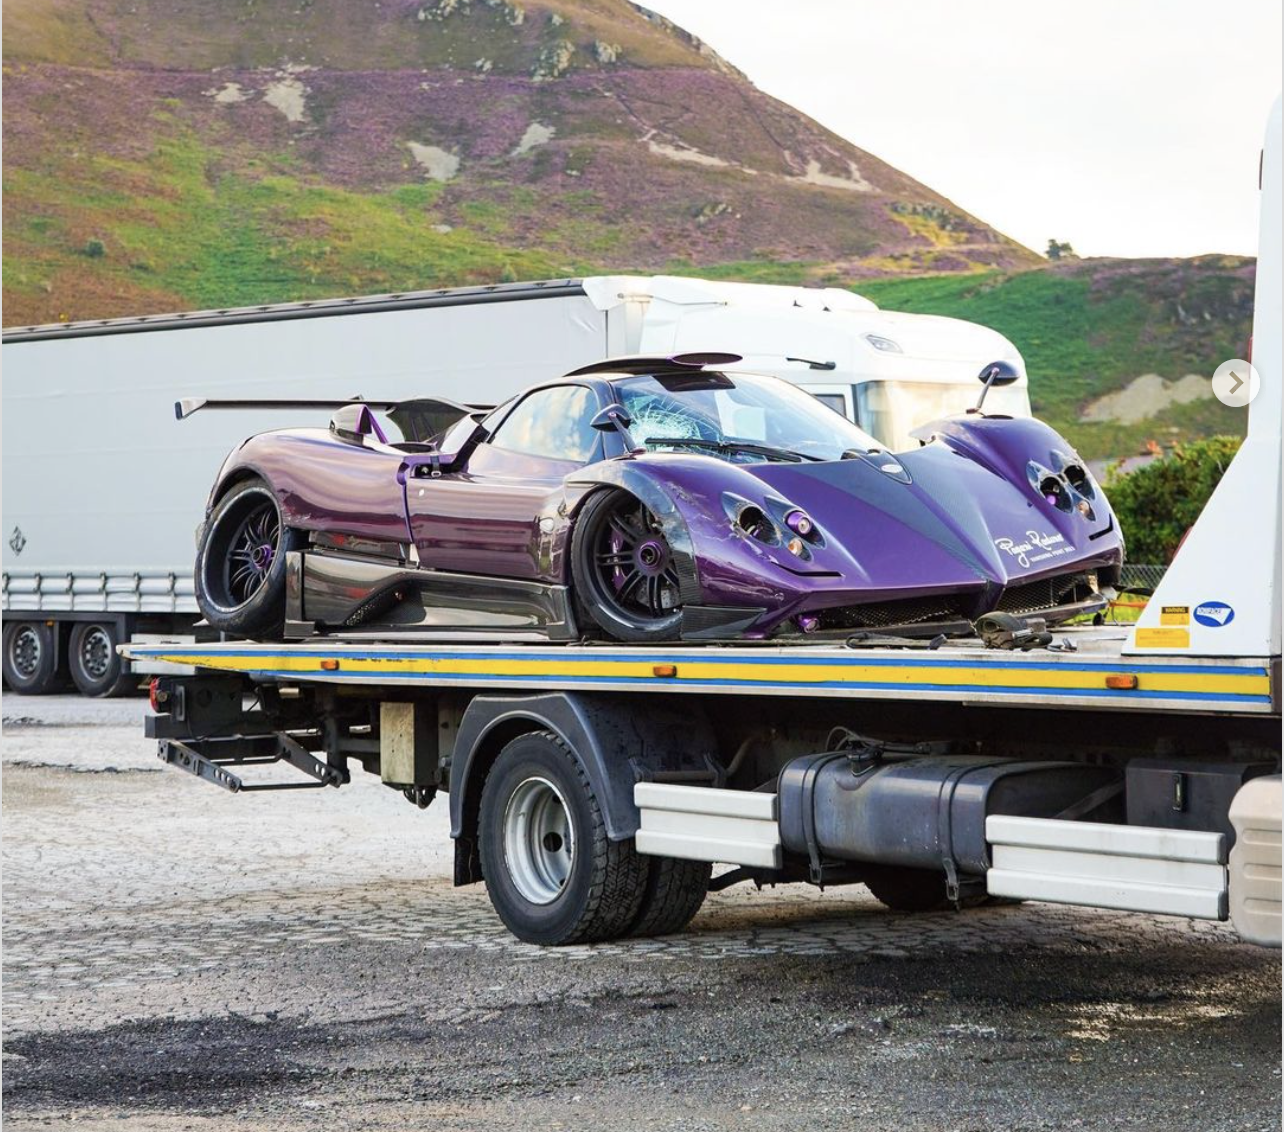 Pagani Zonda Supercar Once Owned by Formula One Driver Lewis Hamilton Wrecked in Wales